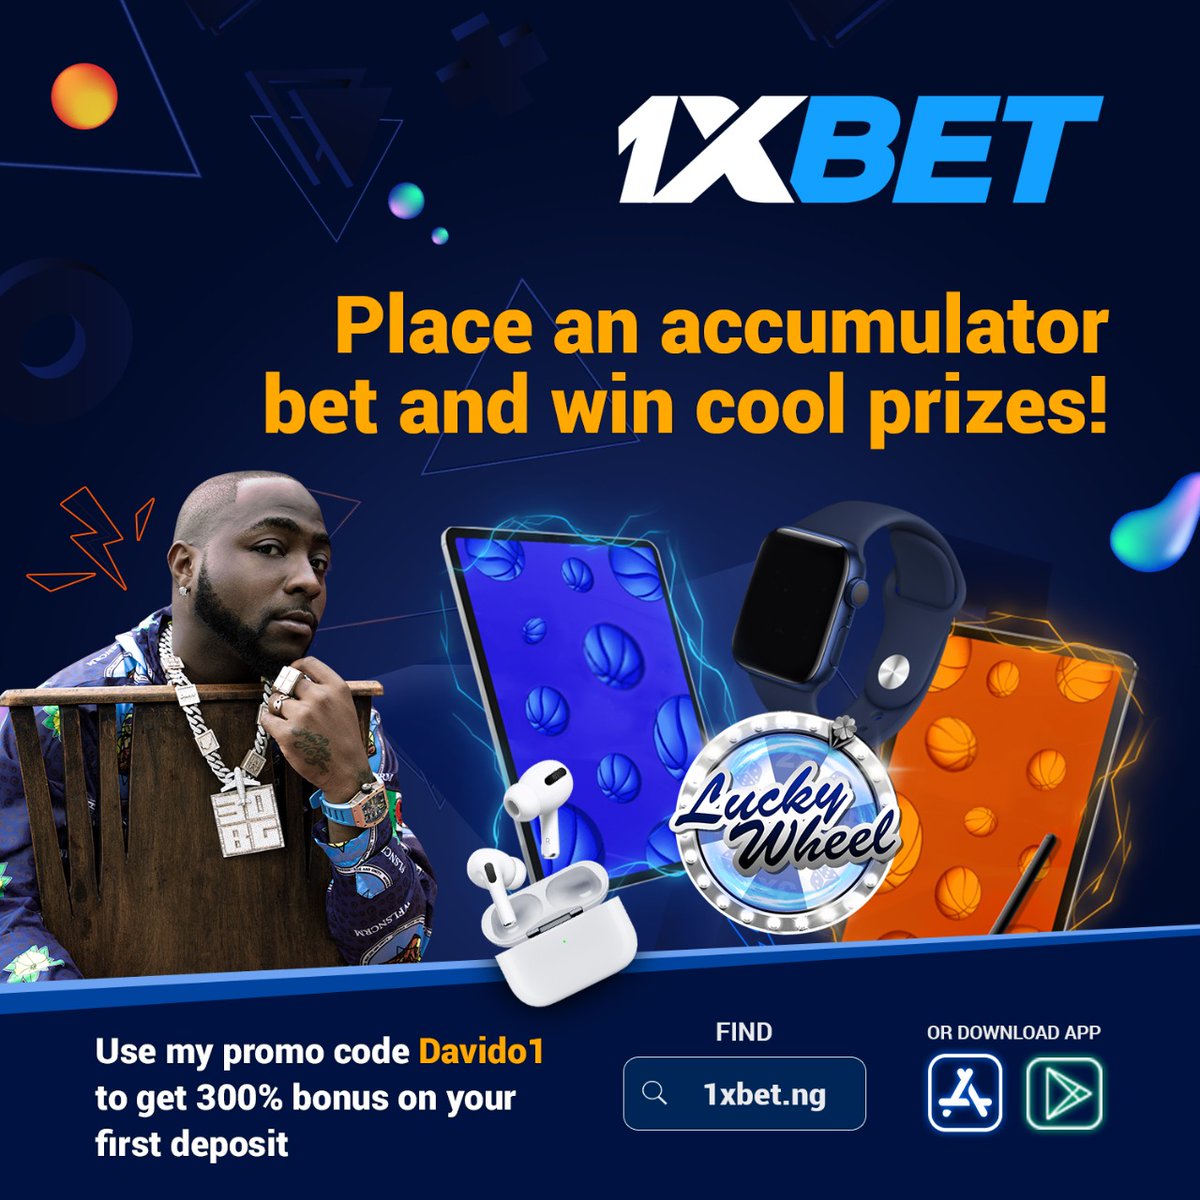 Place an accumulator bet and win cool prizes on 1xBet! Winners will get valuable superprizes of their choice. Register with my promo code “Davido1” you will get up to 189 000 NGN bonus on your first deposit: bit.ly/3hW2ka8